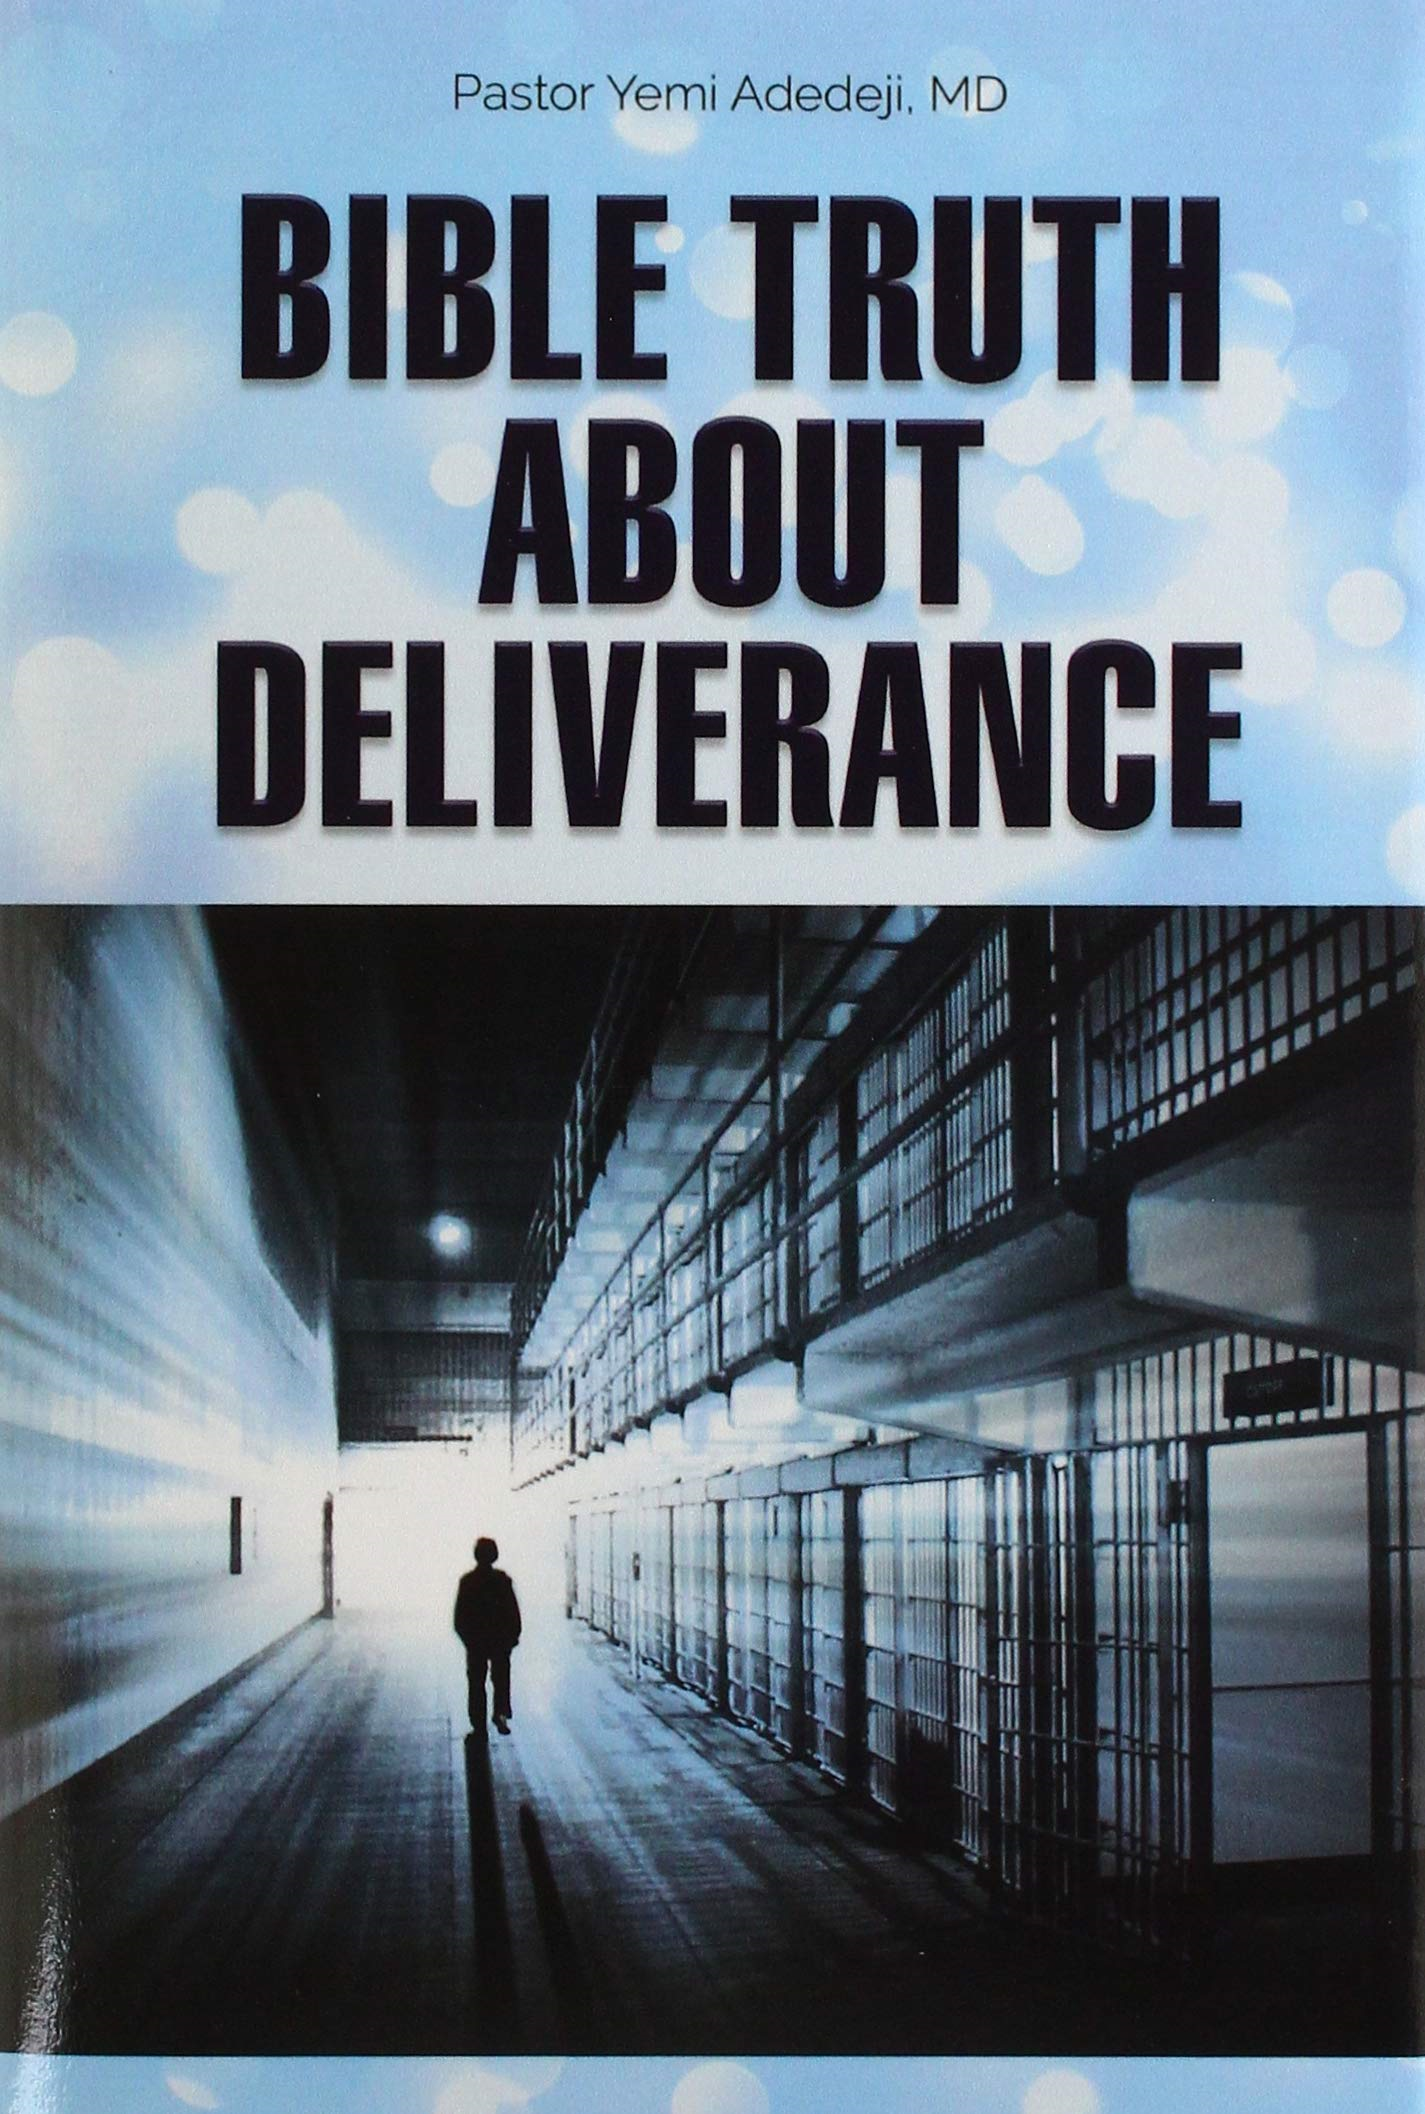 "Bible Truth About Deliverance" Explores the True Meaning of Deliverance for Everyone